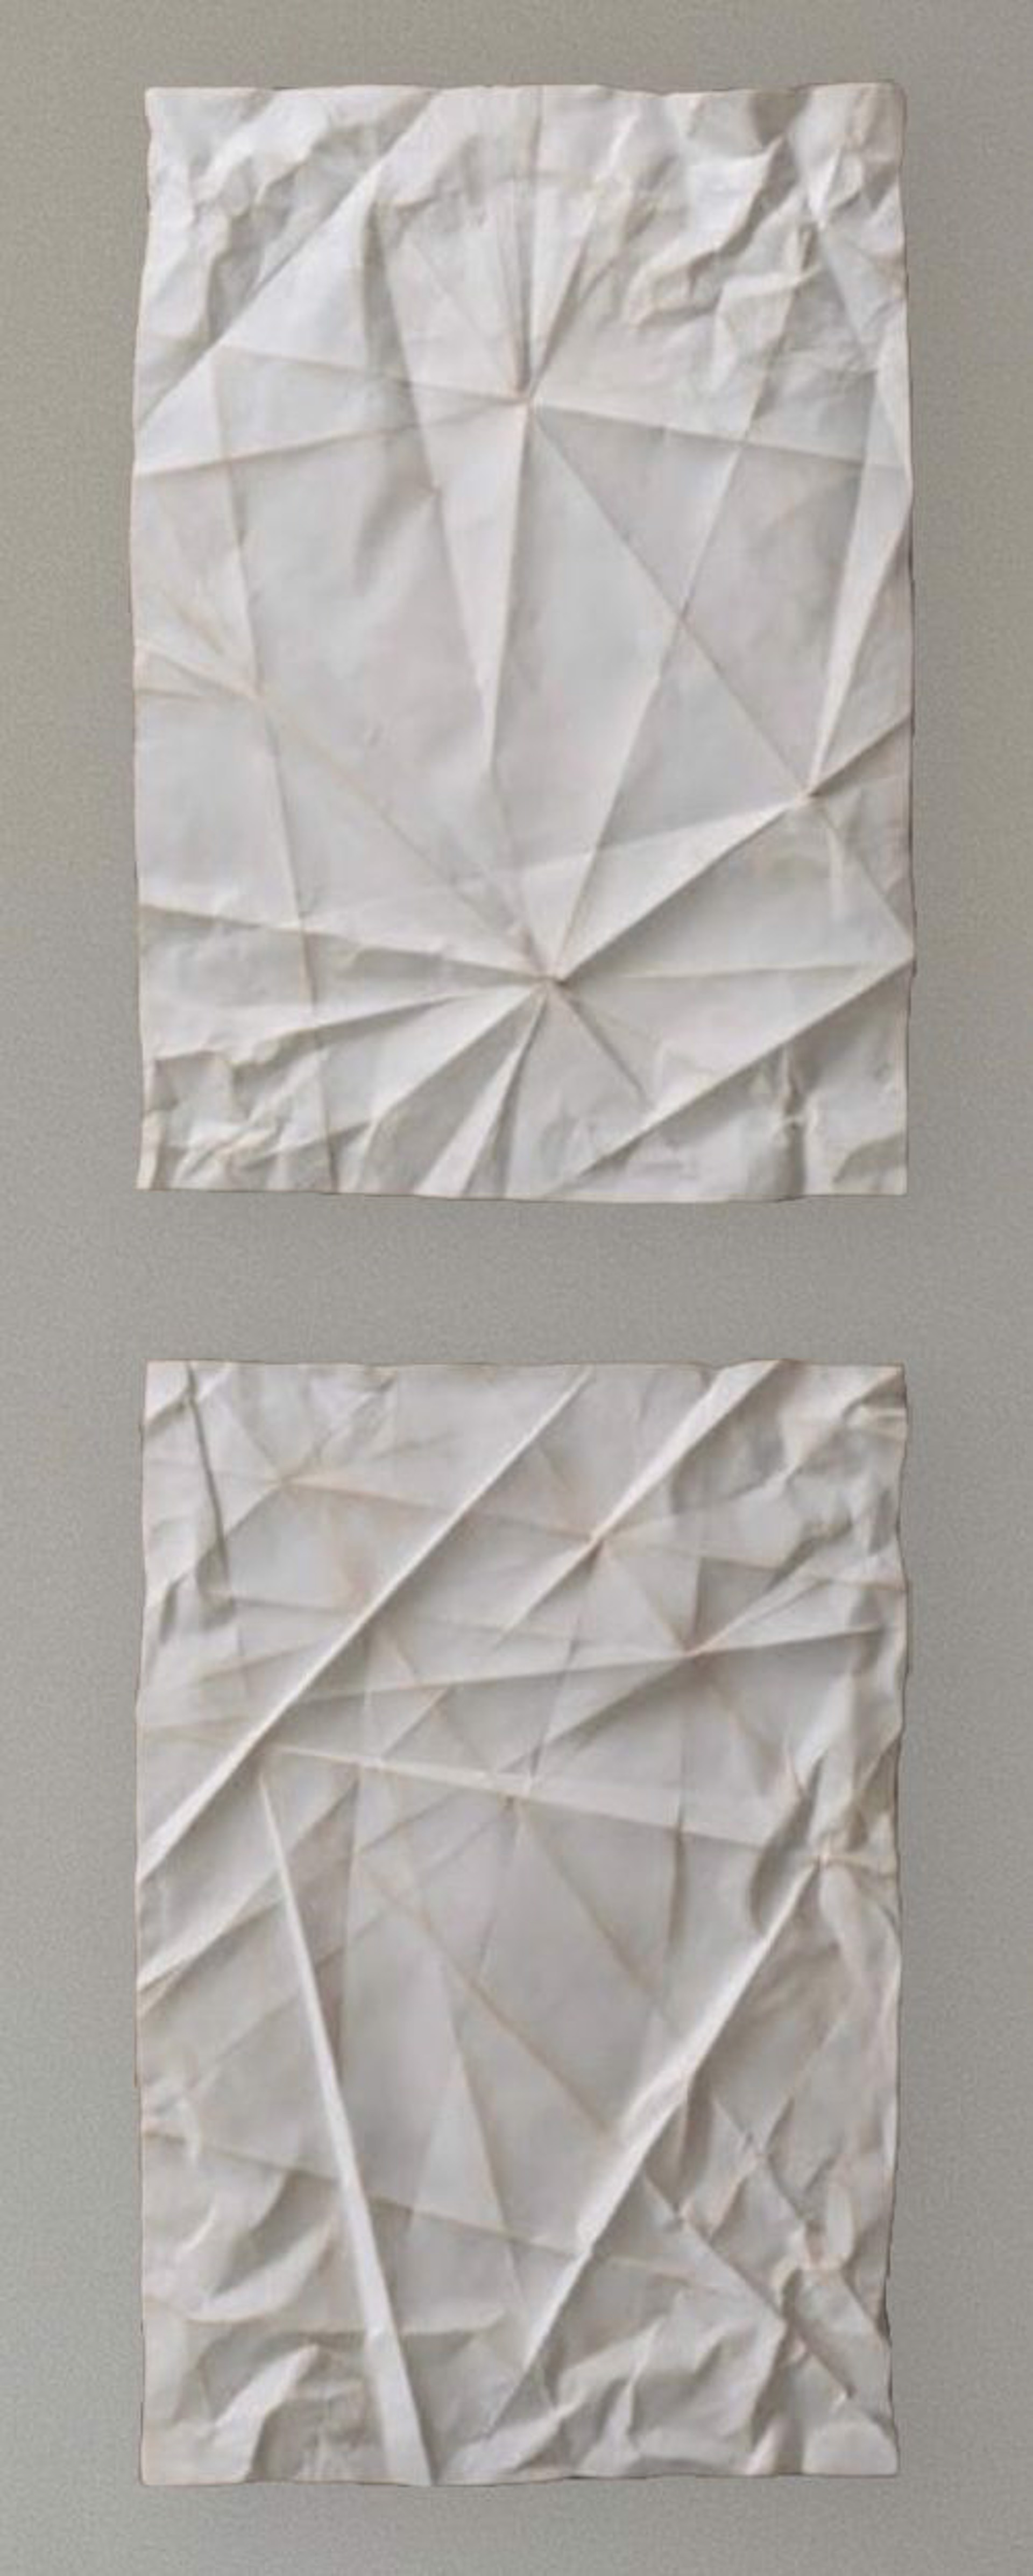 Crease Constellation I & II by Kevin Box Studio